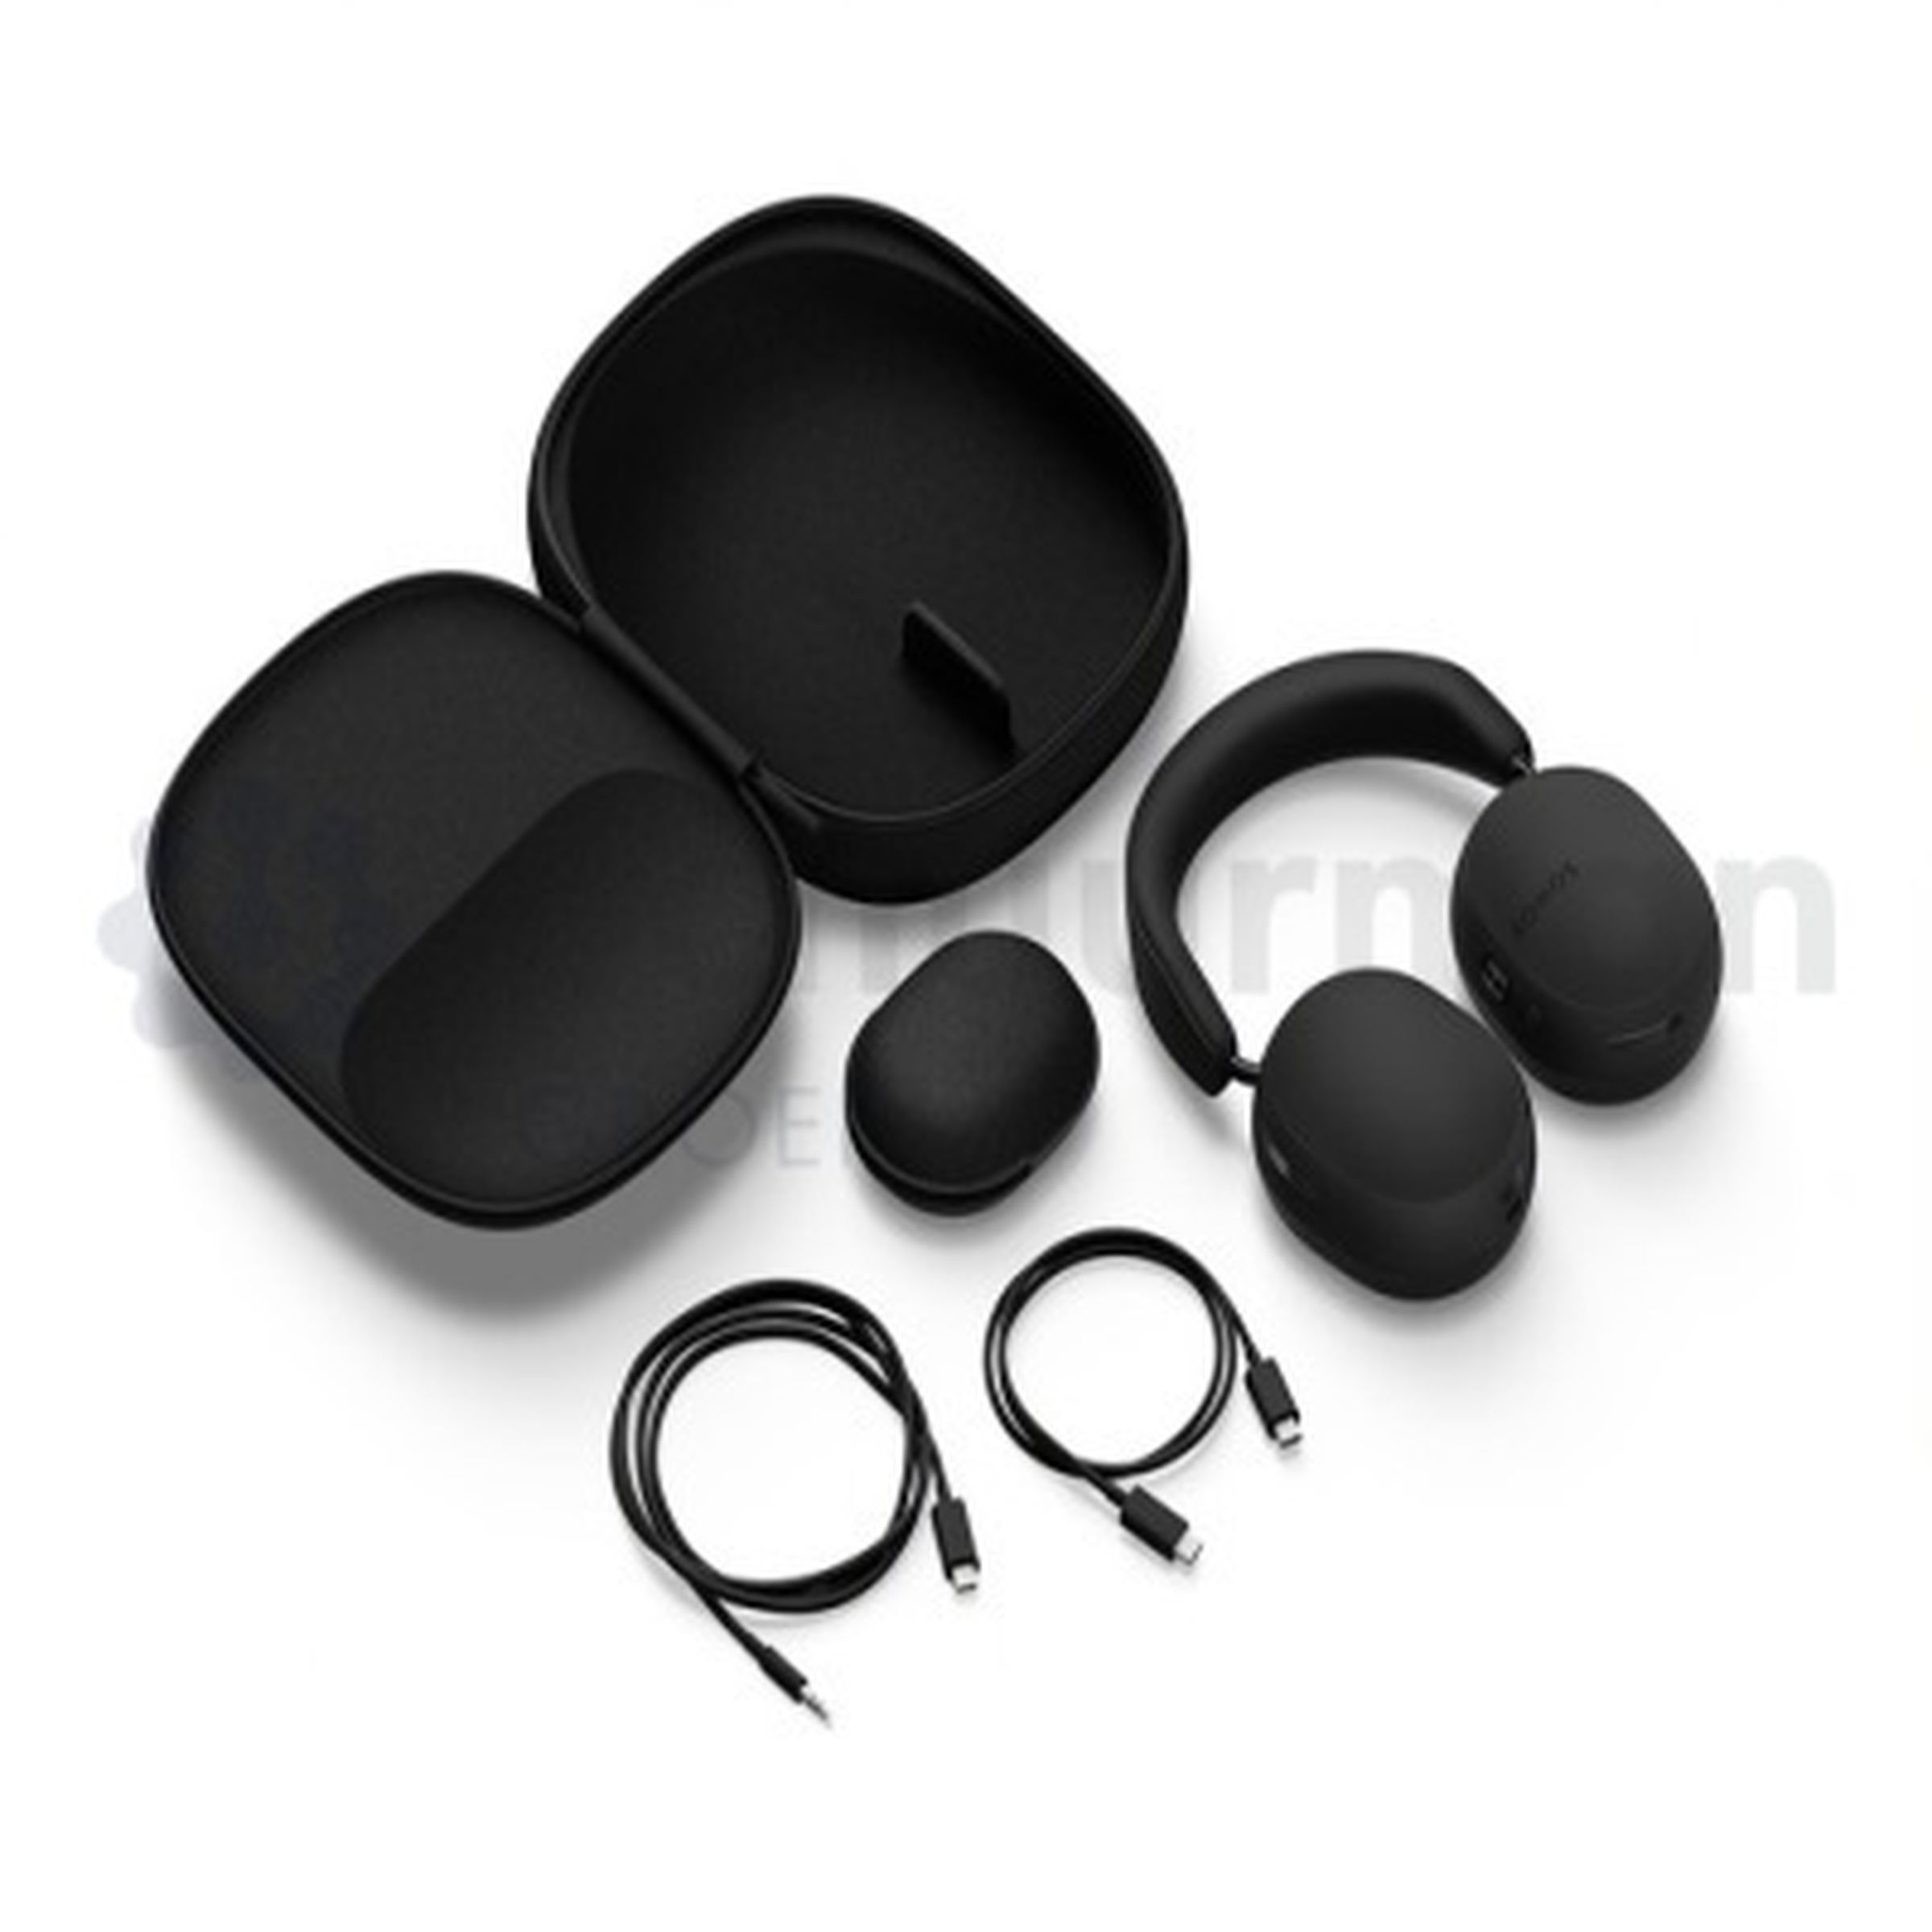 A photo of the Sonos Ace headphones, accessories, and carrying case.